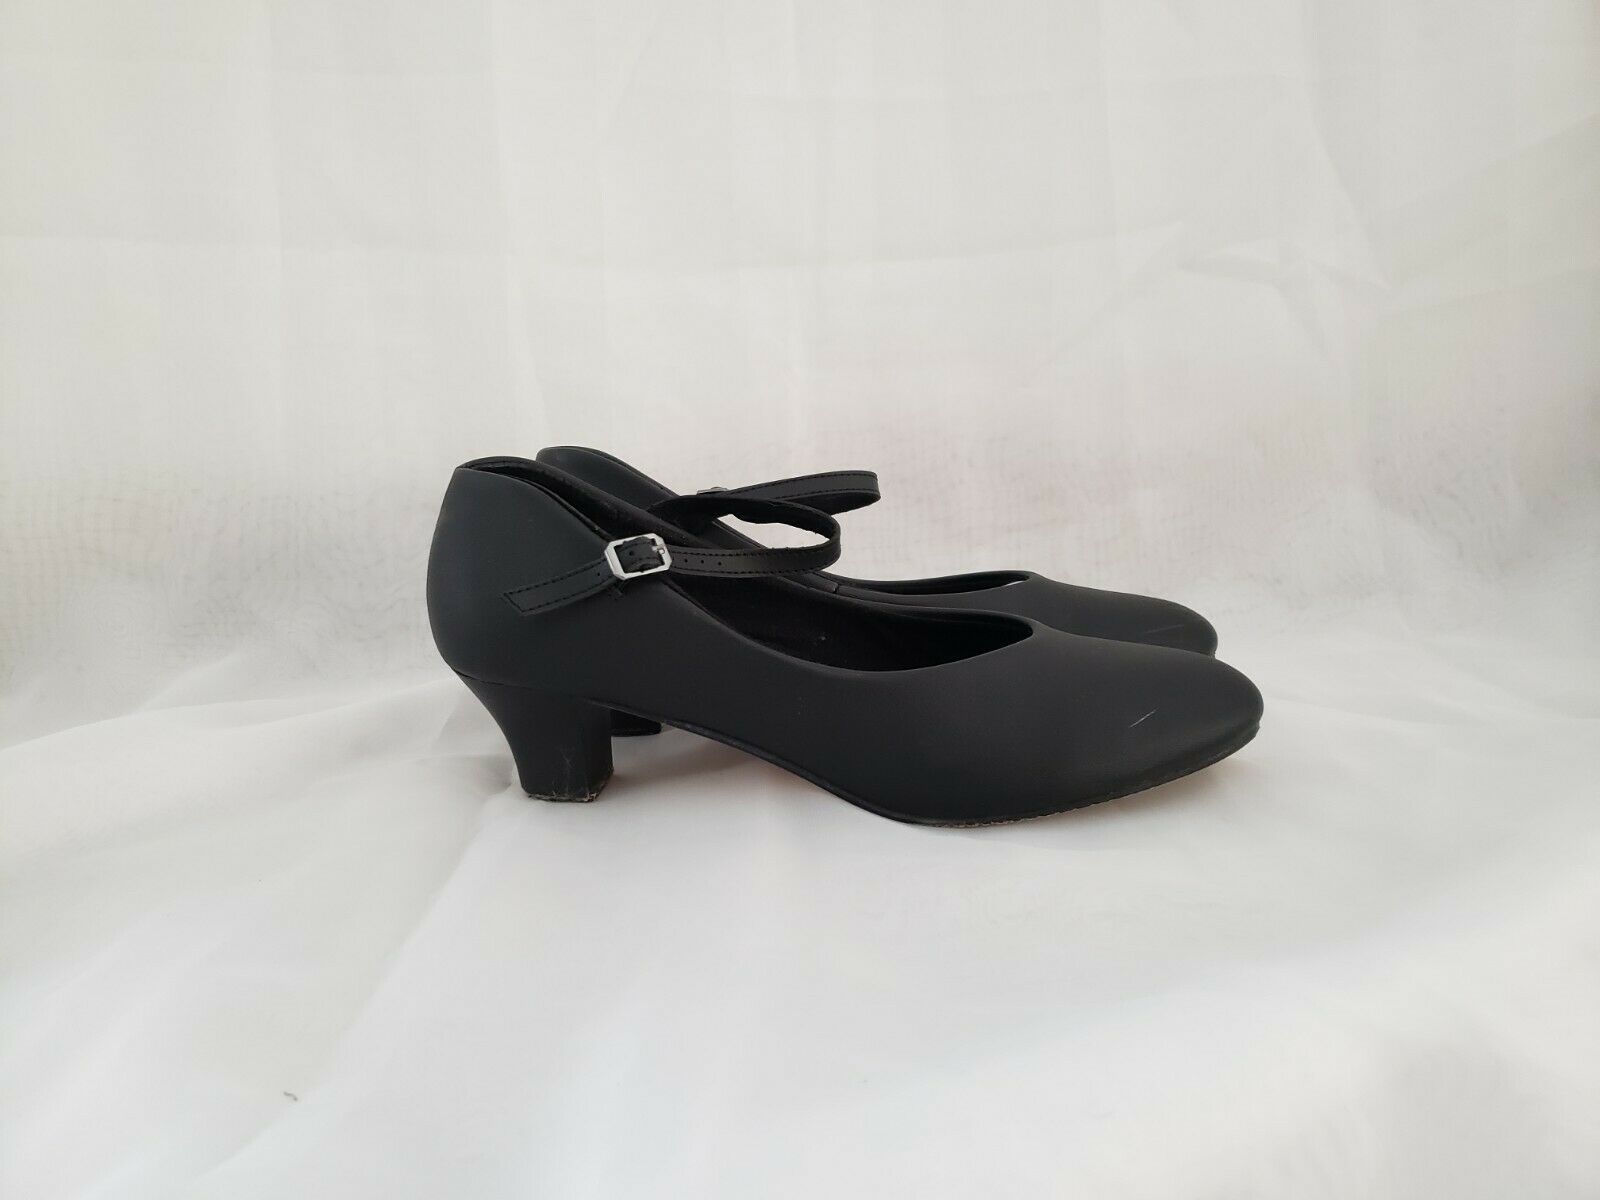 Theatricals Footwear Ladies Character Shoes Size 11